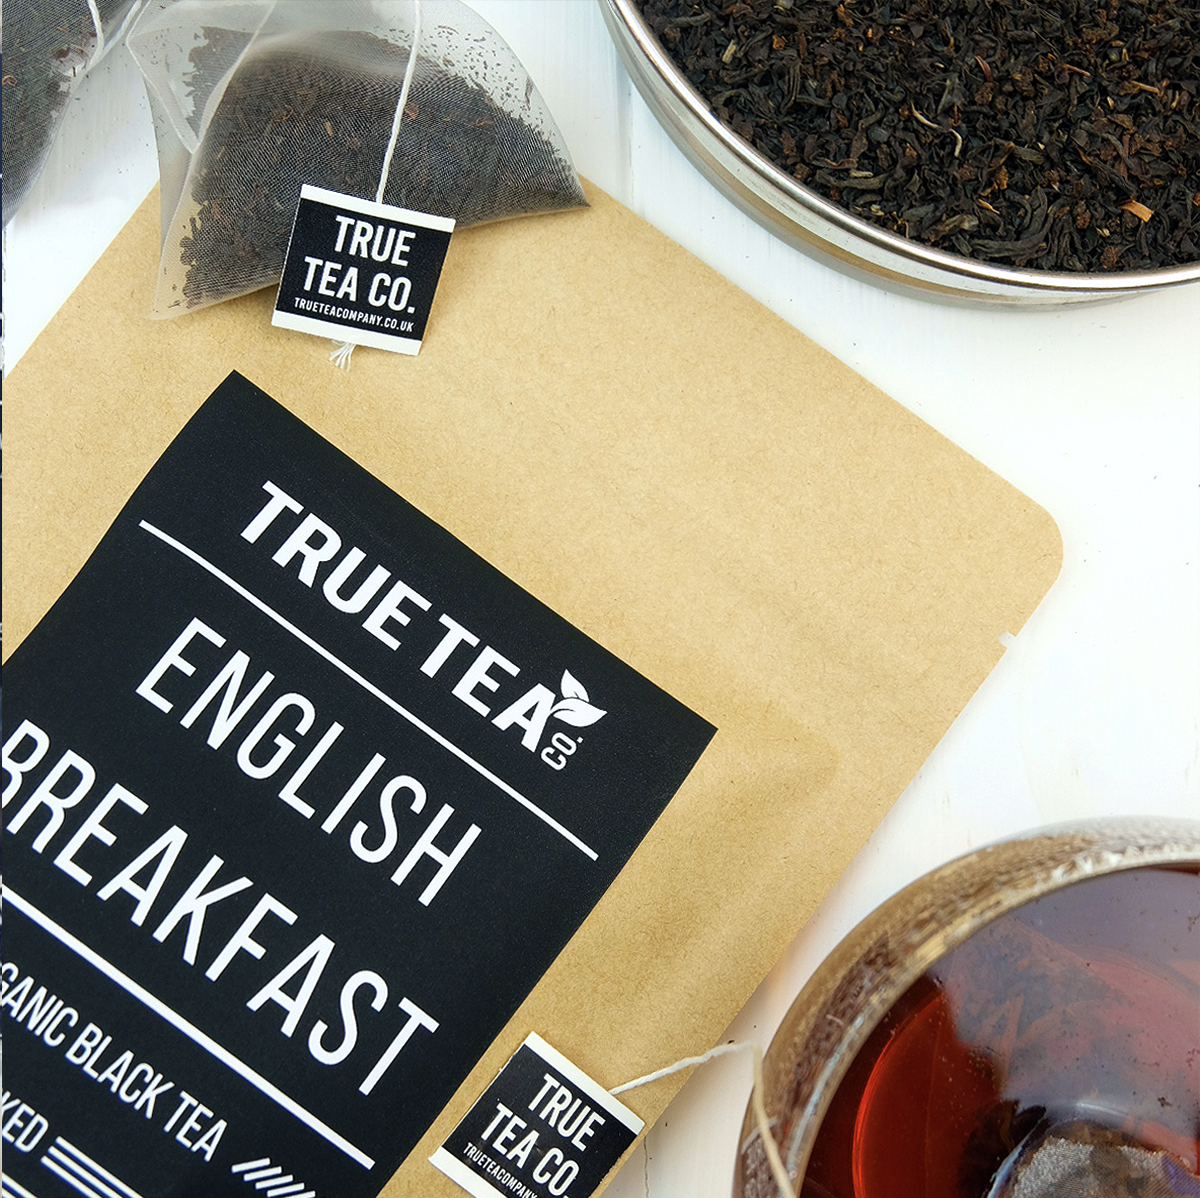 biodegradable packaging and tea bags from true tea company